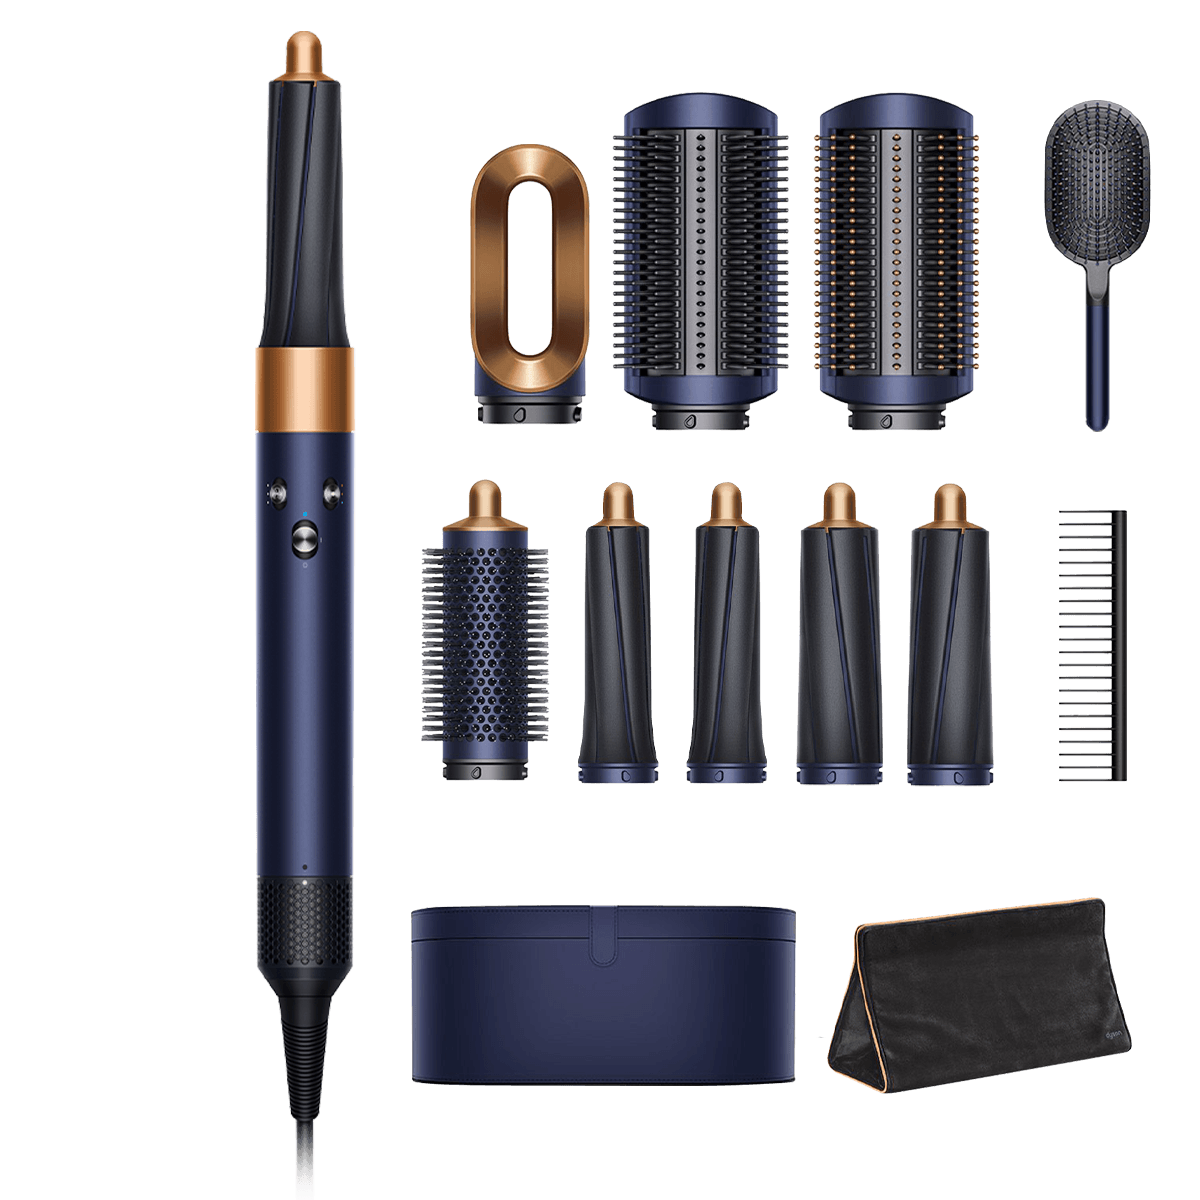 HS01 Airwrap Complete Dark Blue/Co + Bag/Brush/Comb (gifting)